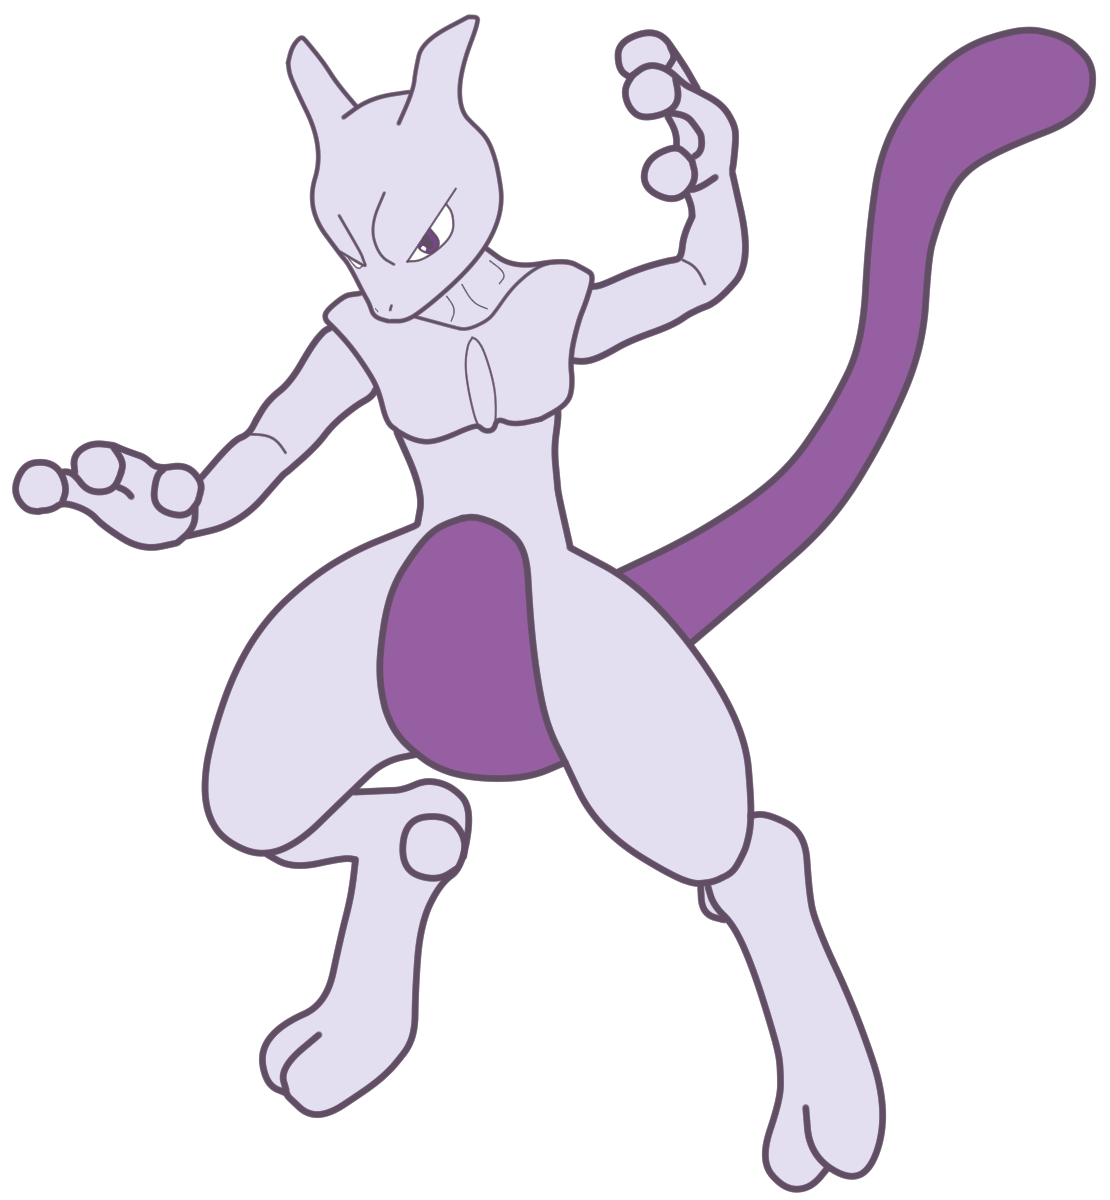 How to Draw Mewtwo from Pokemon | Easy Step-by-Step | Draw, Drawings,  Pokemon